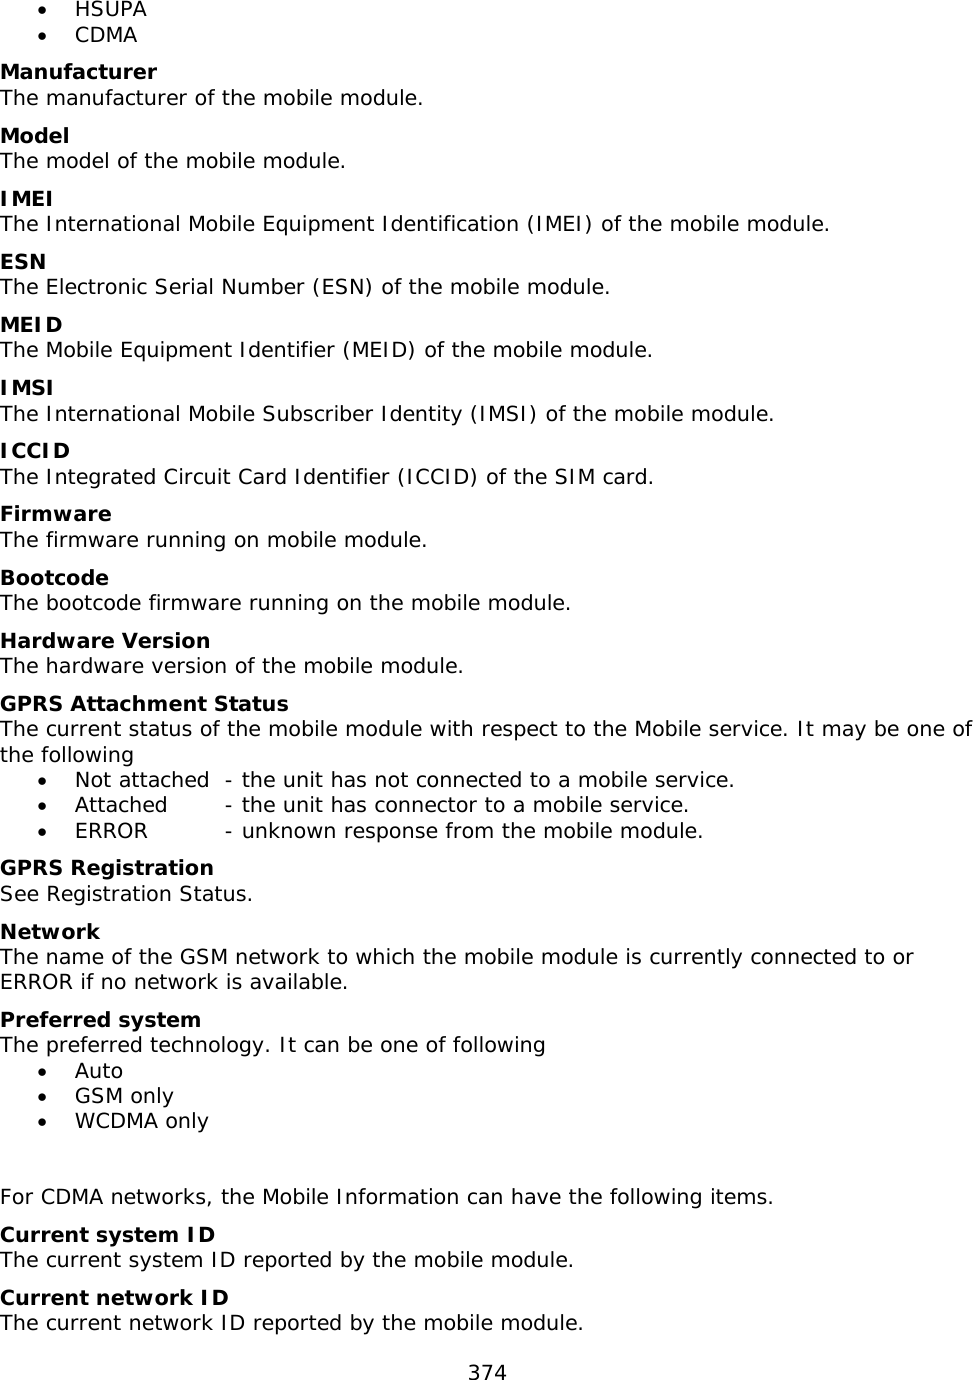 374  • HSUPA • CDMA Manufacturer The manufacturer of the mobile module. Model   The model of the mobile module. IMEI The International Mobile Equipment Identification (IMEI) of the mobile module. ESN The Electronic Serial Number (ESN) of the mobile module. MEID The Mobile Equipment Identifier (MEID) of the mobile module. IMSI The International Mobile Subscriber Identity (IMSI) of the mobile module. ICCID The Integrated Circuit Card Identifier (ICCID) of the SIM card. Firmware The firmware running on mobile module. Bootcode The bootcode firmware running on the mobile module. Hardware Version The hardware version of the mobile module. GPRS Attachment Status The current status of the mobile module with respect to the Mobile service. It may be one of the following • Not attached  - the unit has not connected to a mobile service. • Attached  - the unit has connector to a mobile service. • ERROR   - unknown response from the mobile module. GPRS Registration See Registration Status. Network The name of the GSM network to which the mobile module is currently connected to or ERROR if no network is available.  Preferred system The preferred technology. It can be one of following • Auto • GSM only • WCDMA only   For CDMA networks, the Mobile Information can have the following items. Current system ID The current system ID reported by the mobile module. Current network ID The current network ID reported by the mobile module. 